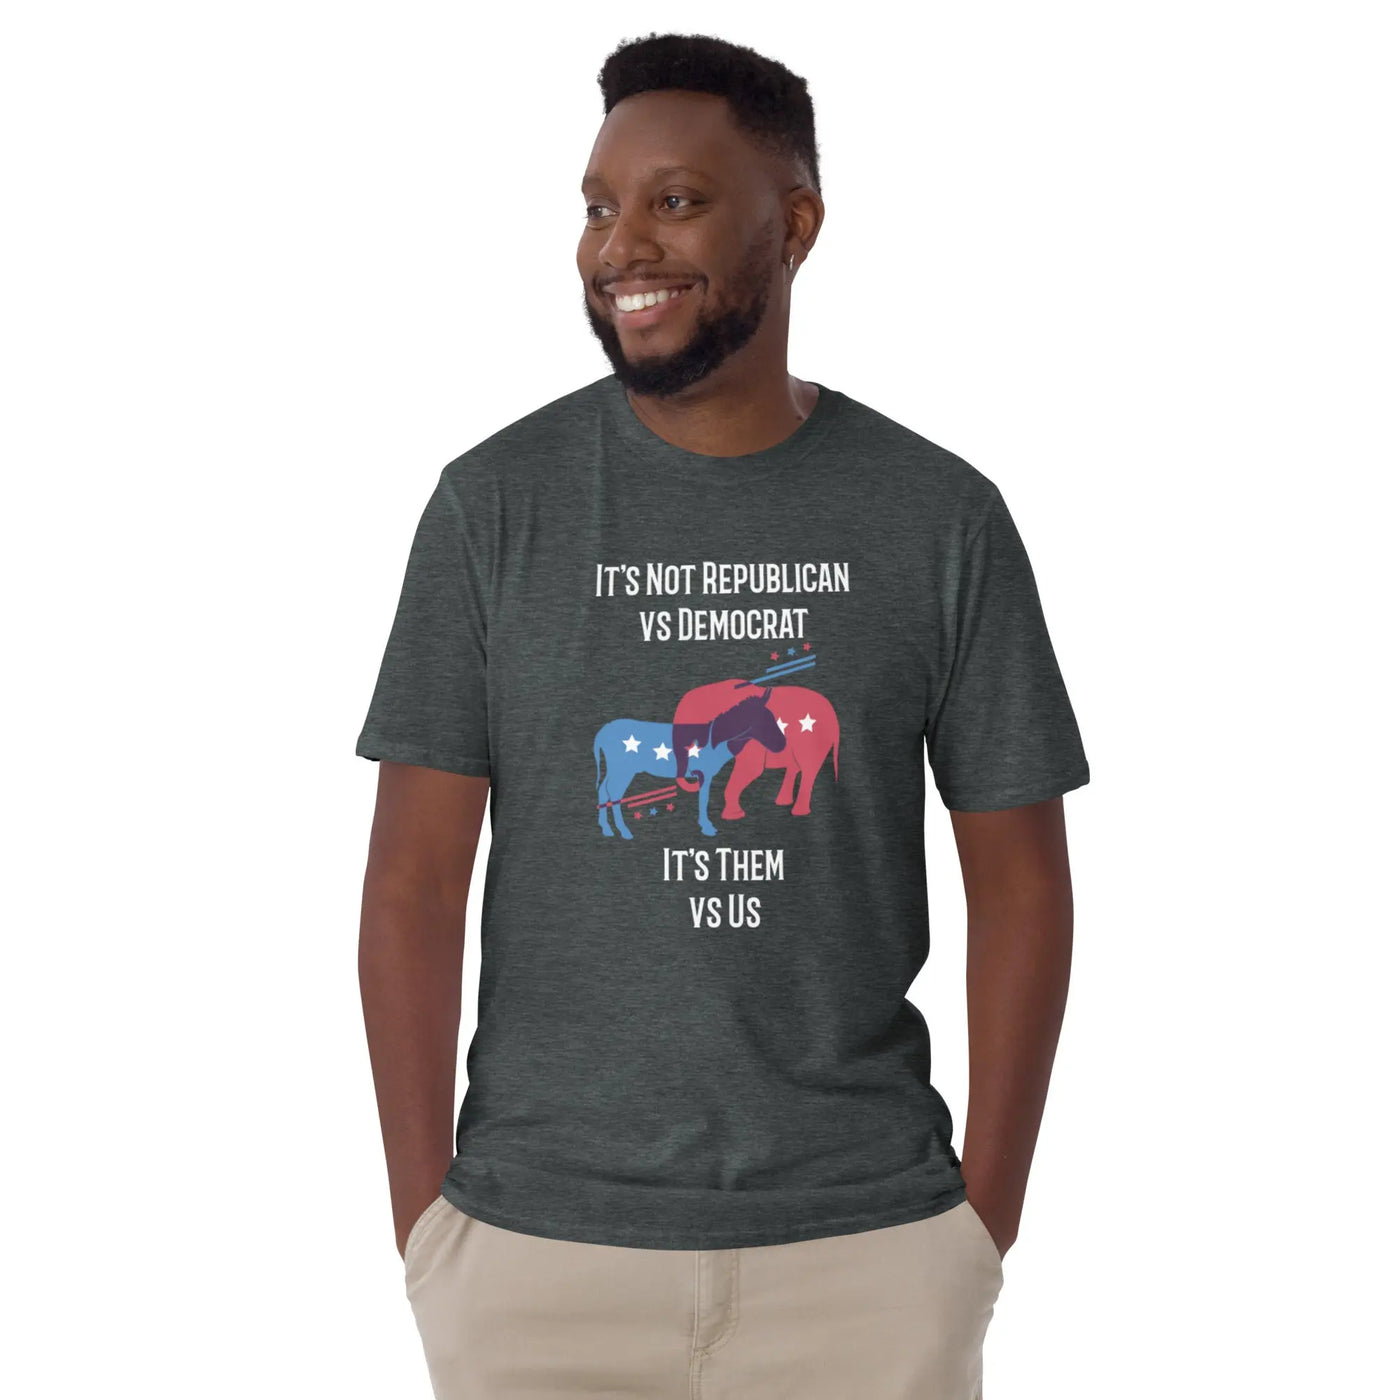 Black man wearing dark heather grey they vs us political t-shirt featuring graphics of both democrat and republican parties.